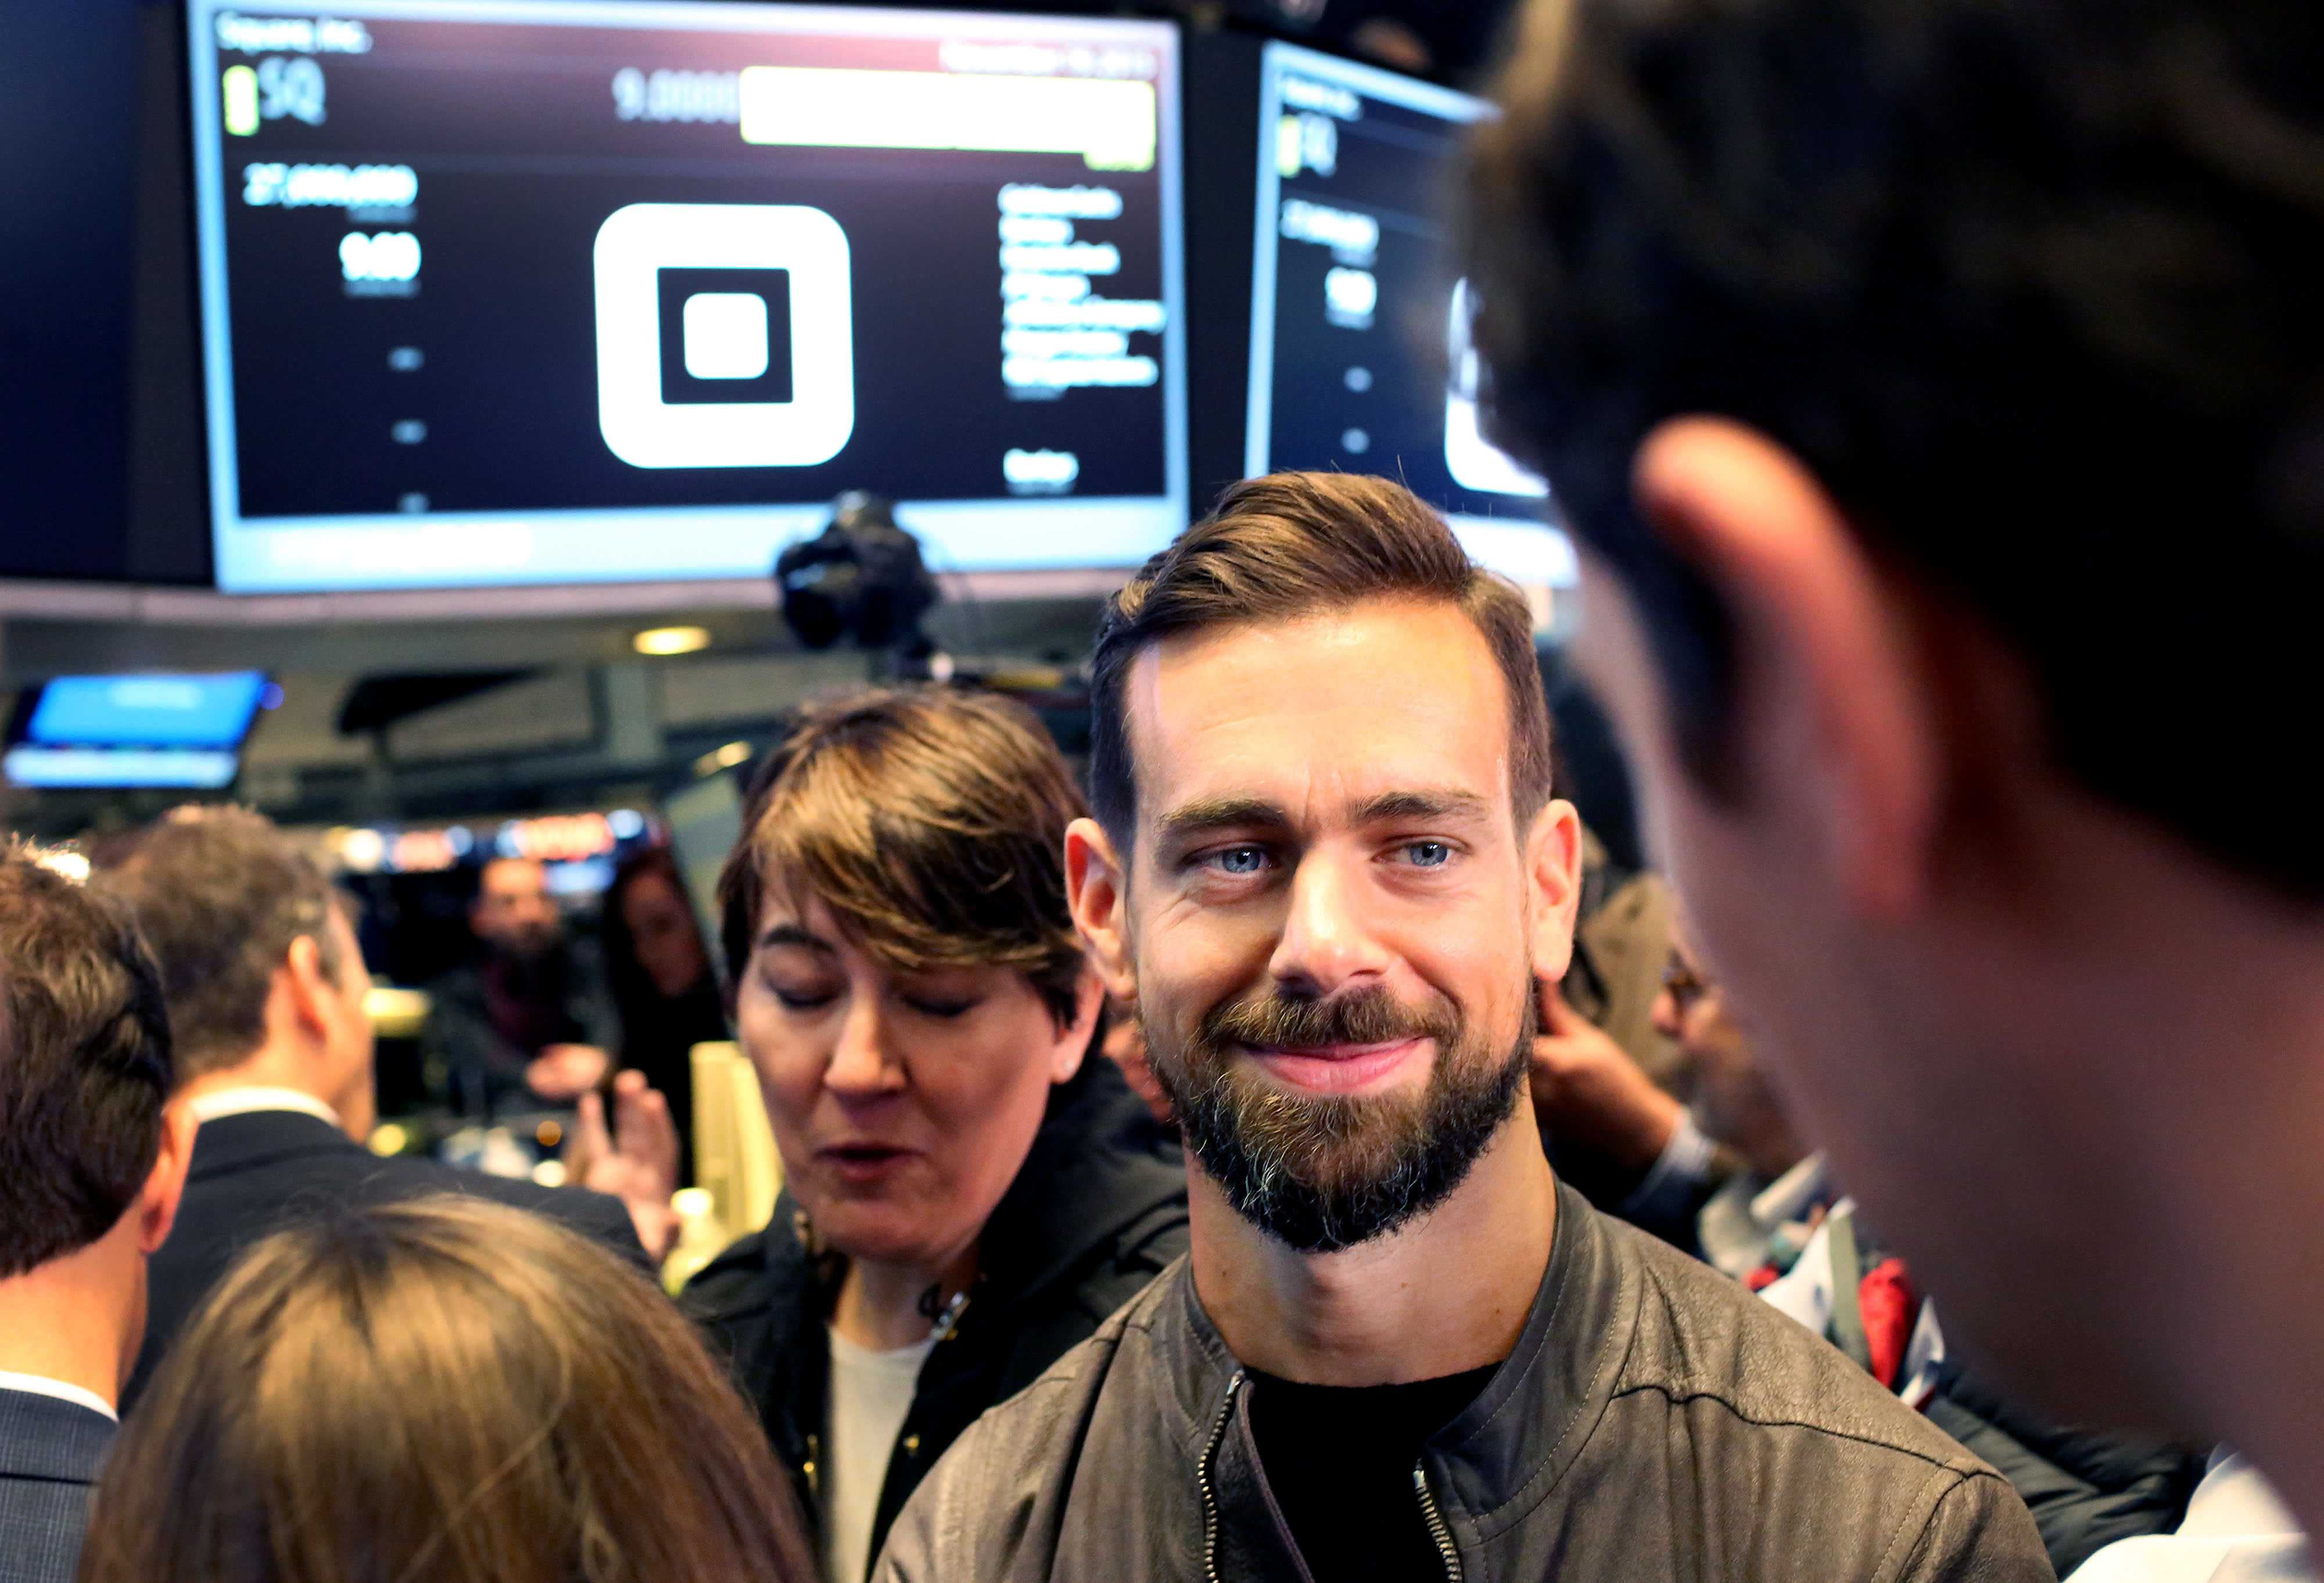 Square shares jump after Jack Dorsey’s business starts its own bank